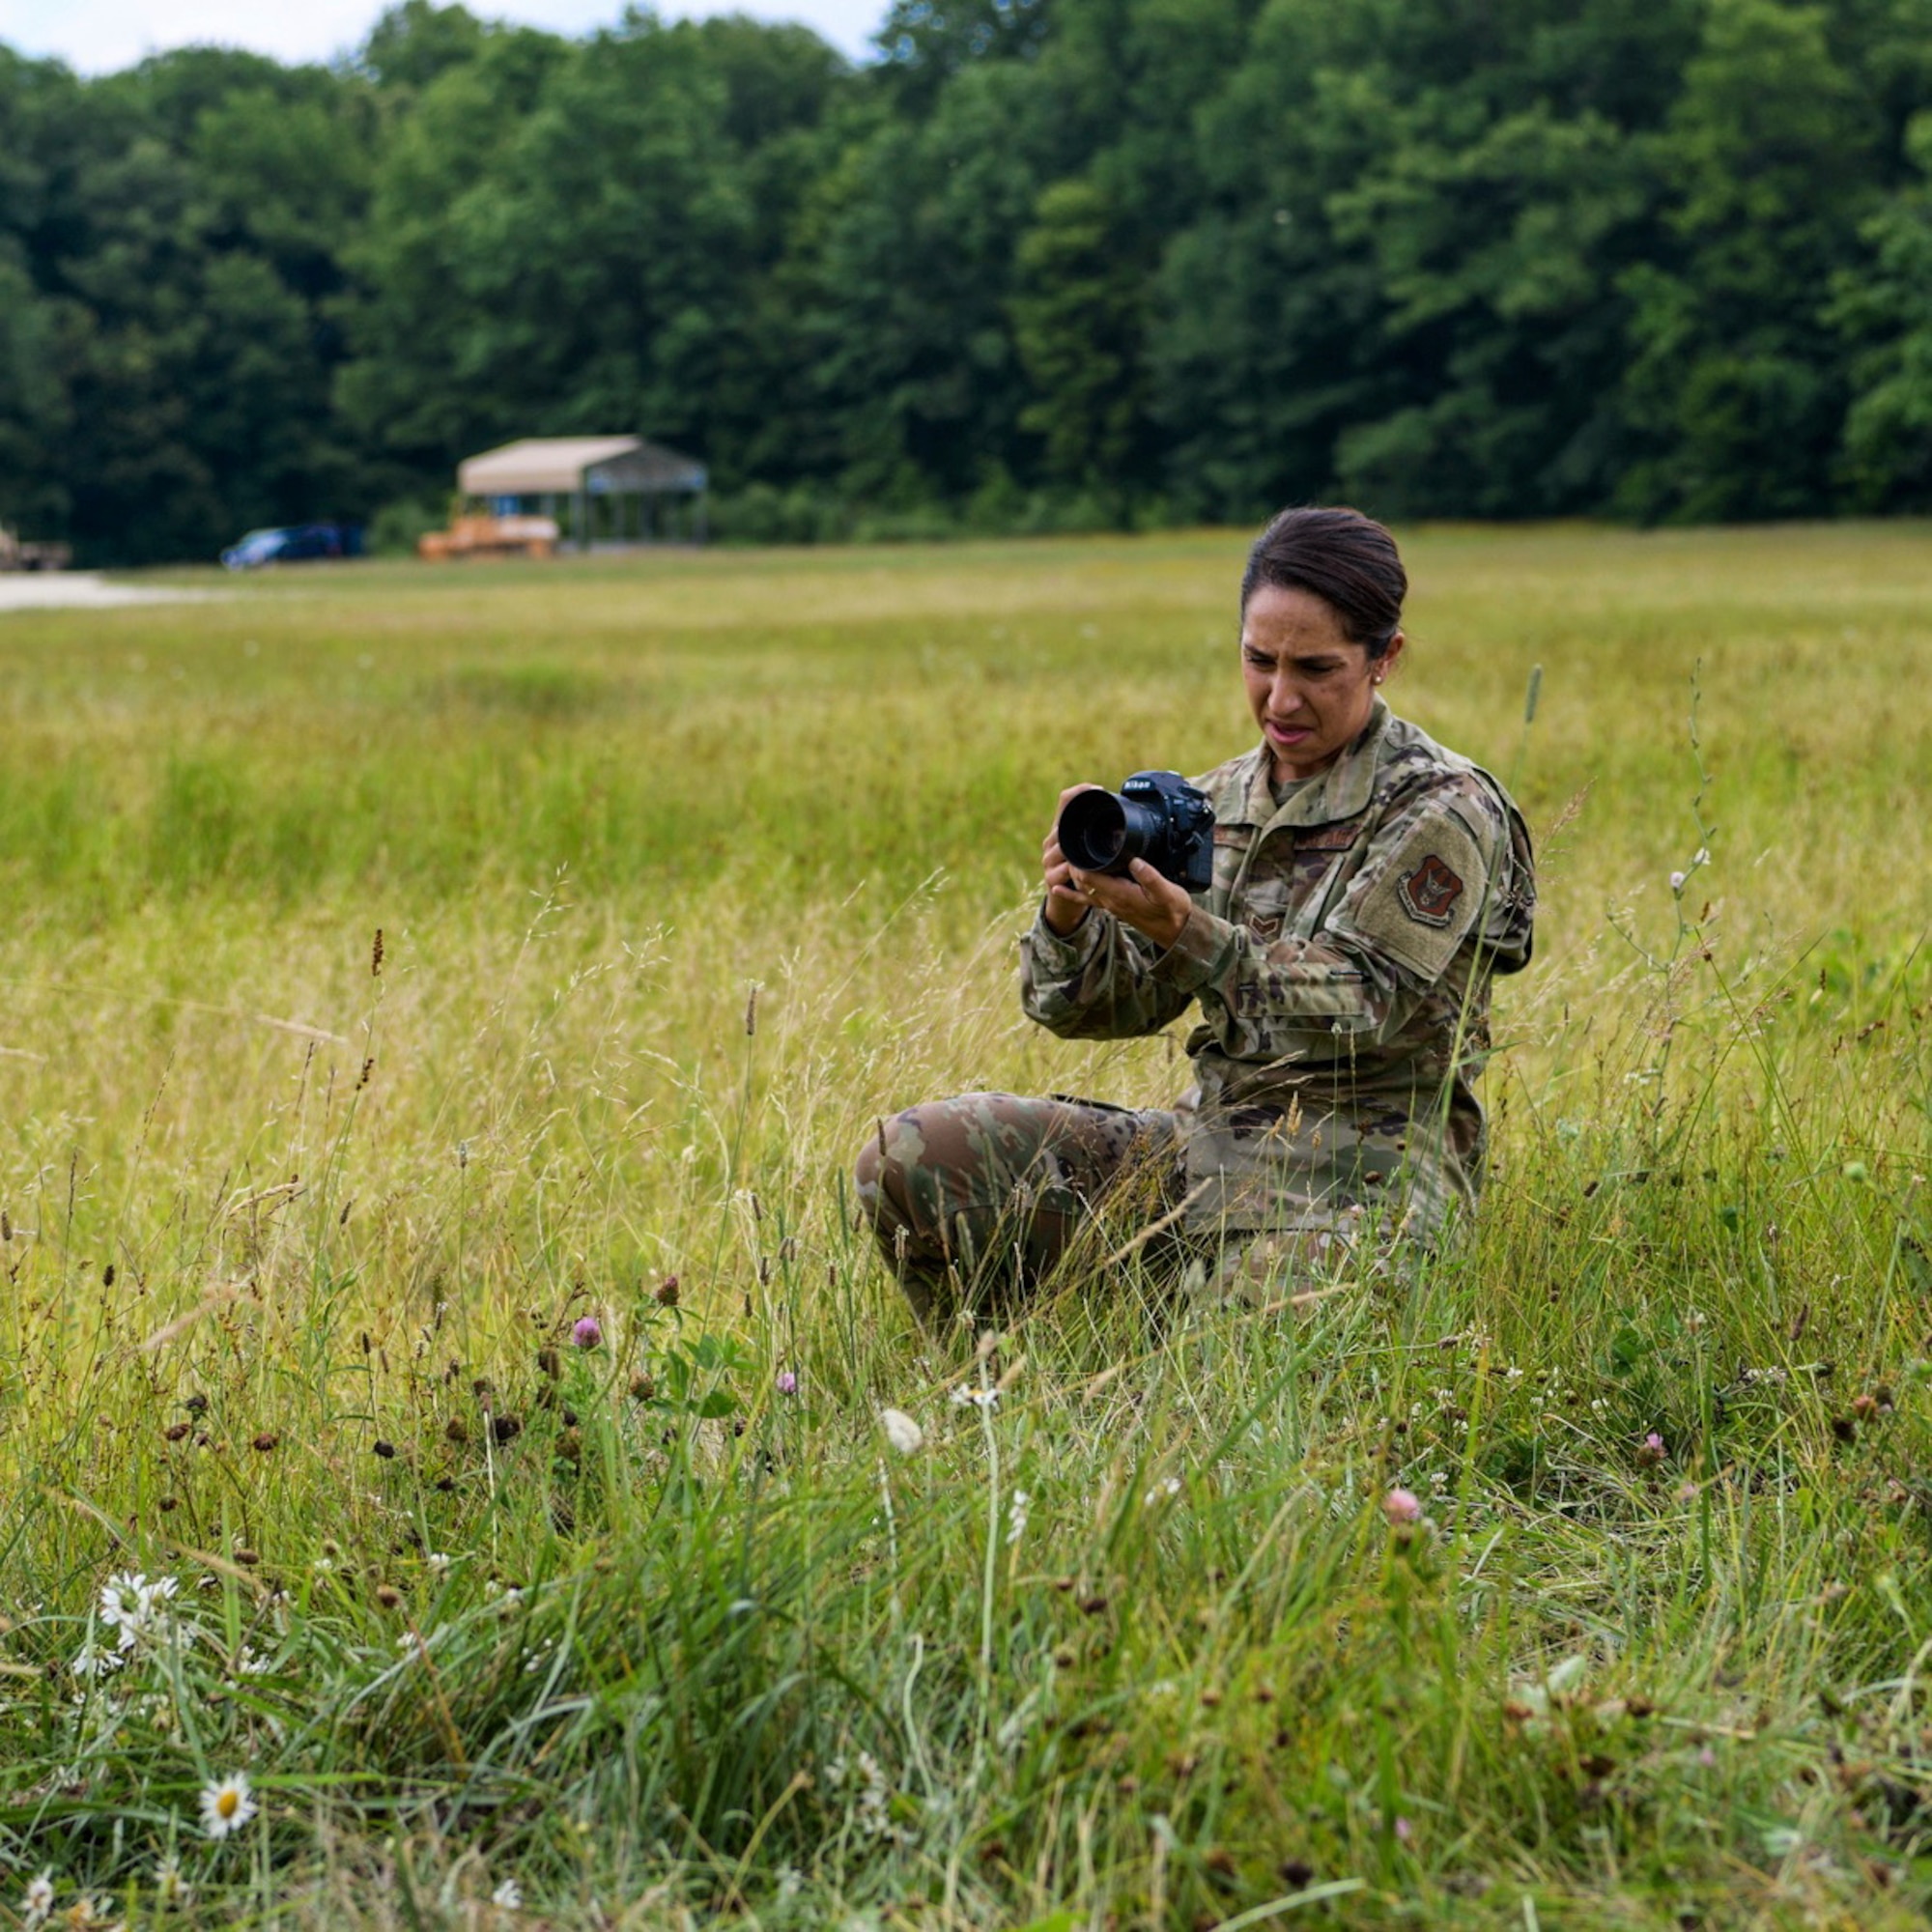 Senior Airman Christina Russo, a public affairs specialist with the 910th Airlift Wing, takes a video of a cargo drop training mission, July 14, 2020, at Camp Garfield in Ravenna, Ohio. As a public affairs specialist, Russo is trained to capture both still photography and video to tell the Air Force story.